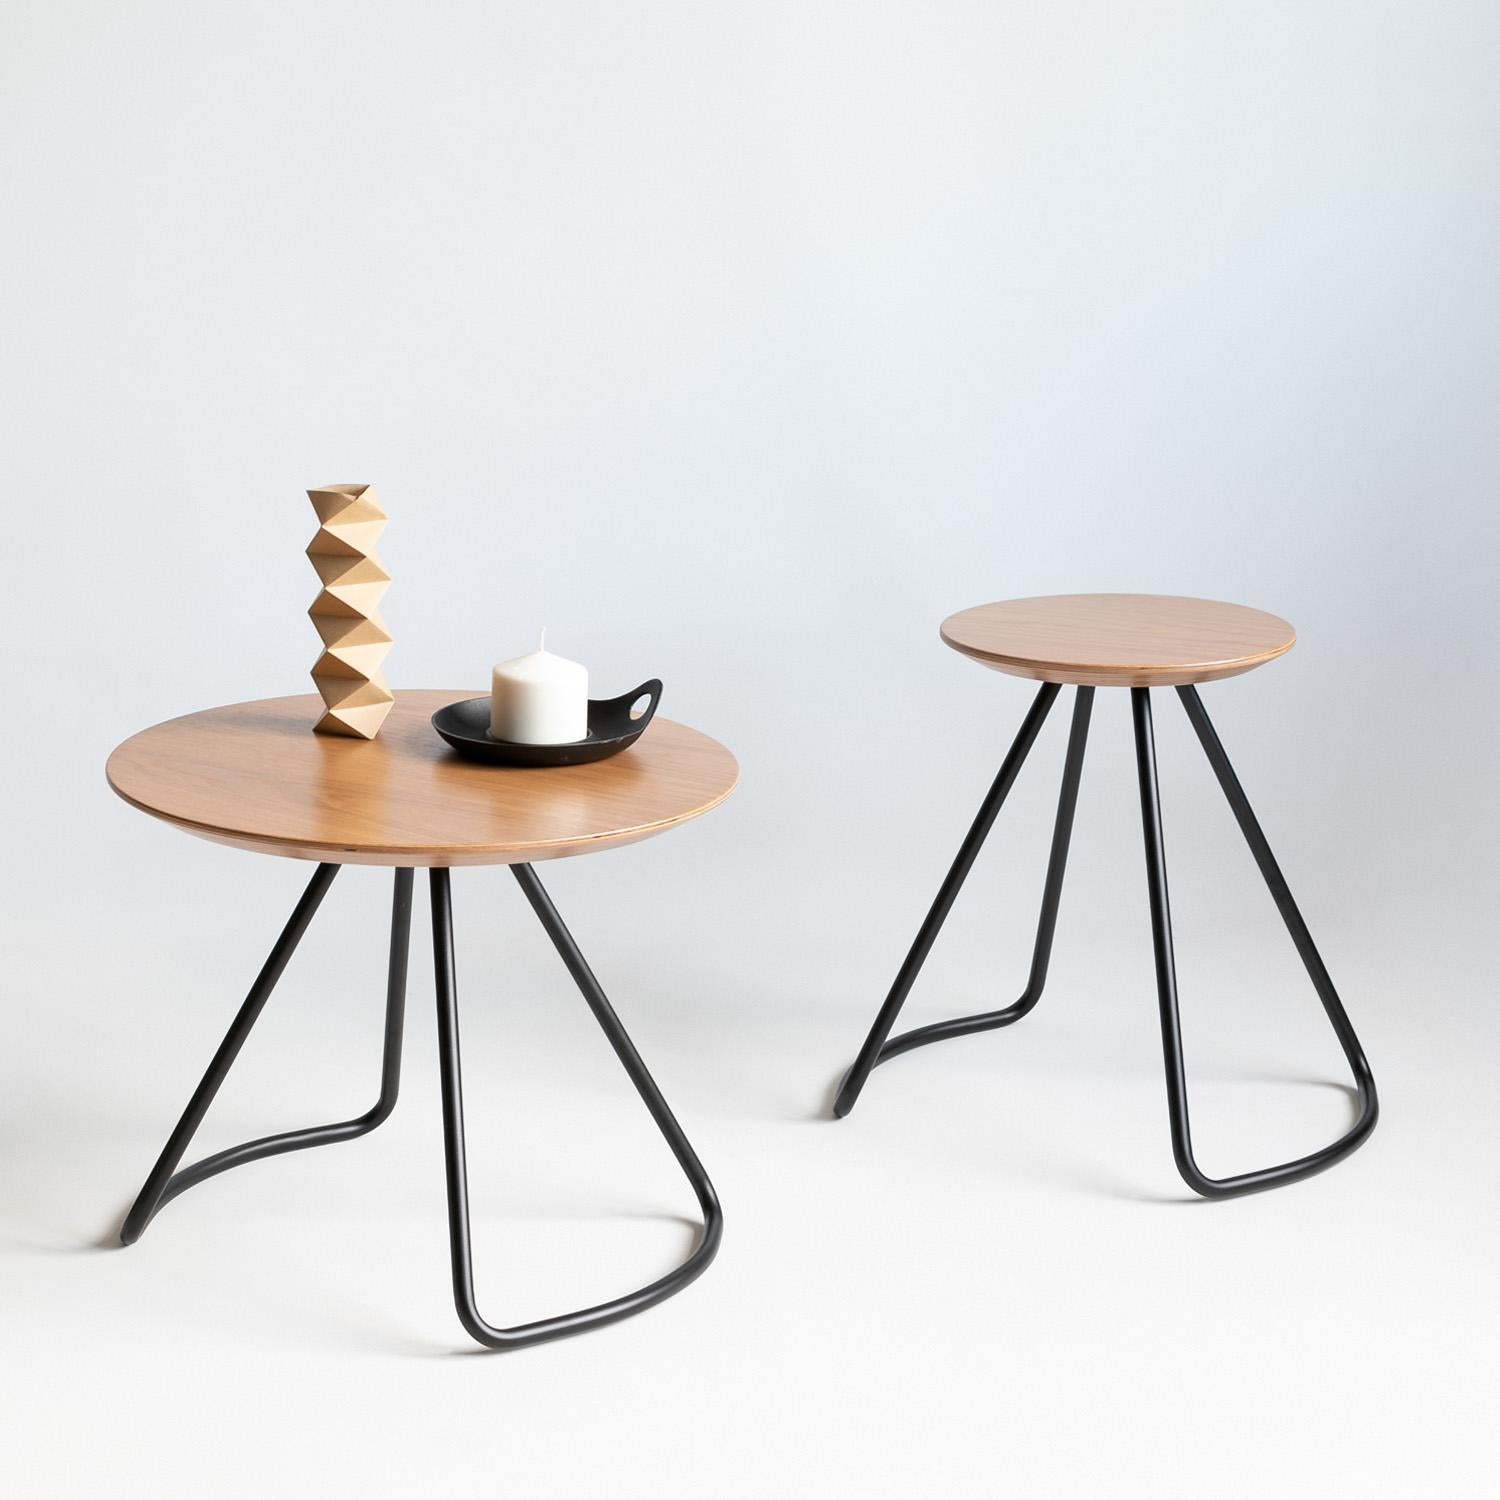 Sama stool/table is part of the Sama collection, which provides functionality through simple, yet striking and sculptural forms that add a unique and elegant touch to its environment. Sama stool/table serves as a practical companion to be used as a